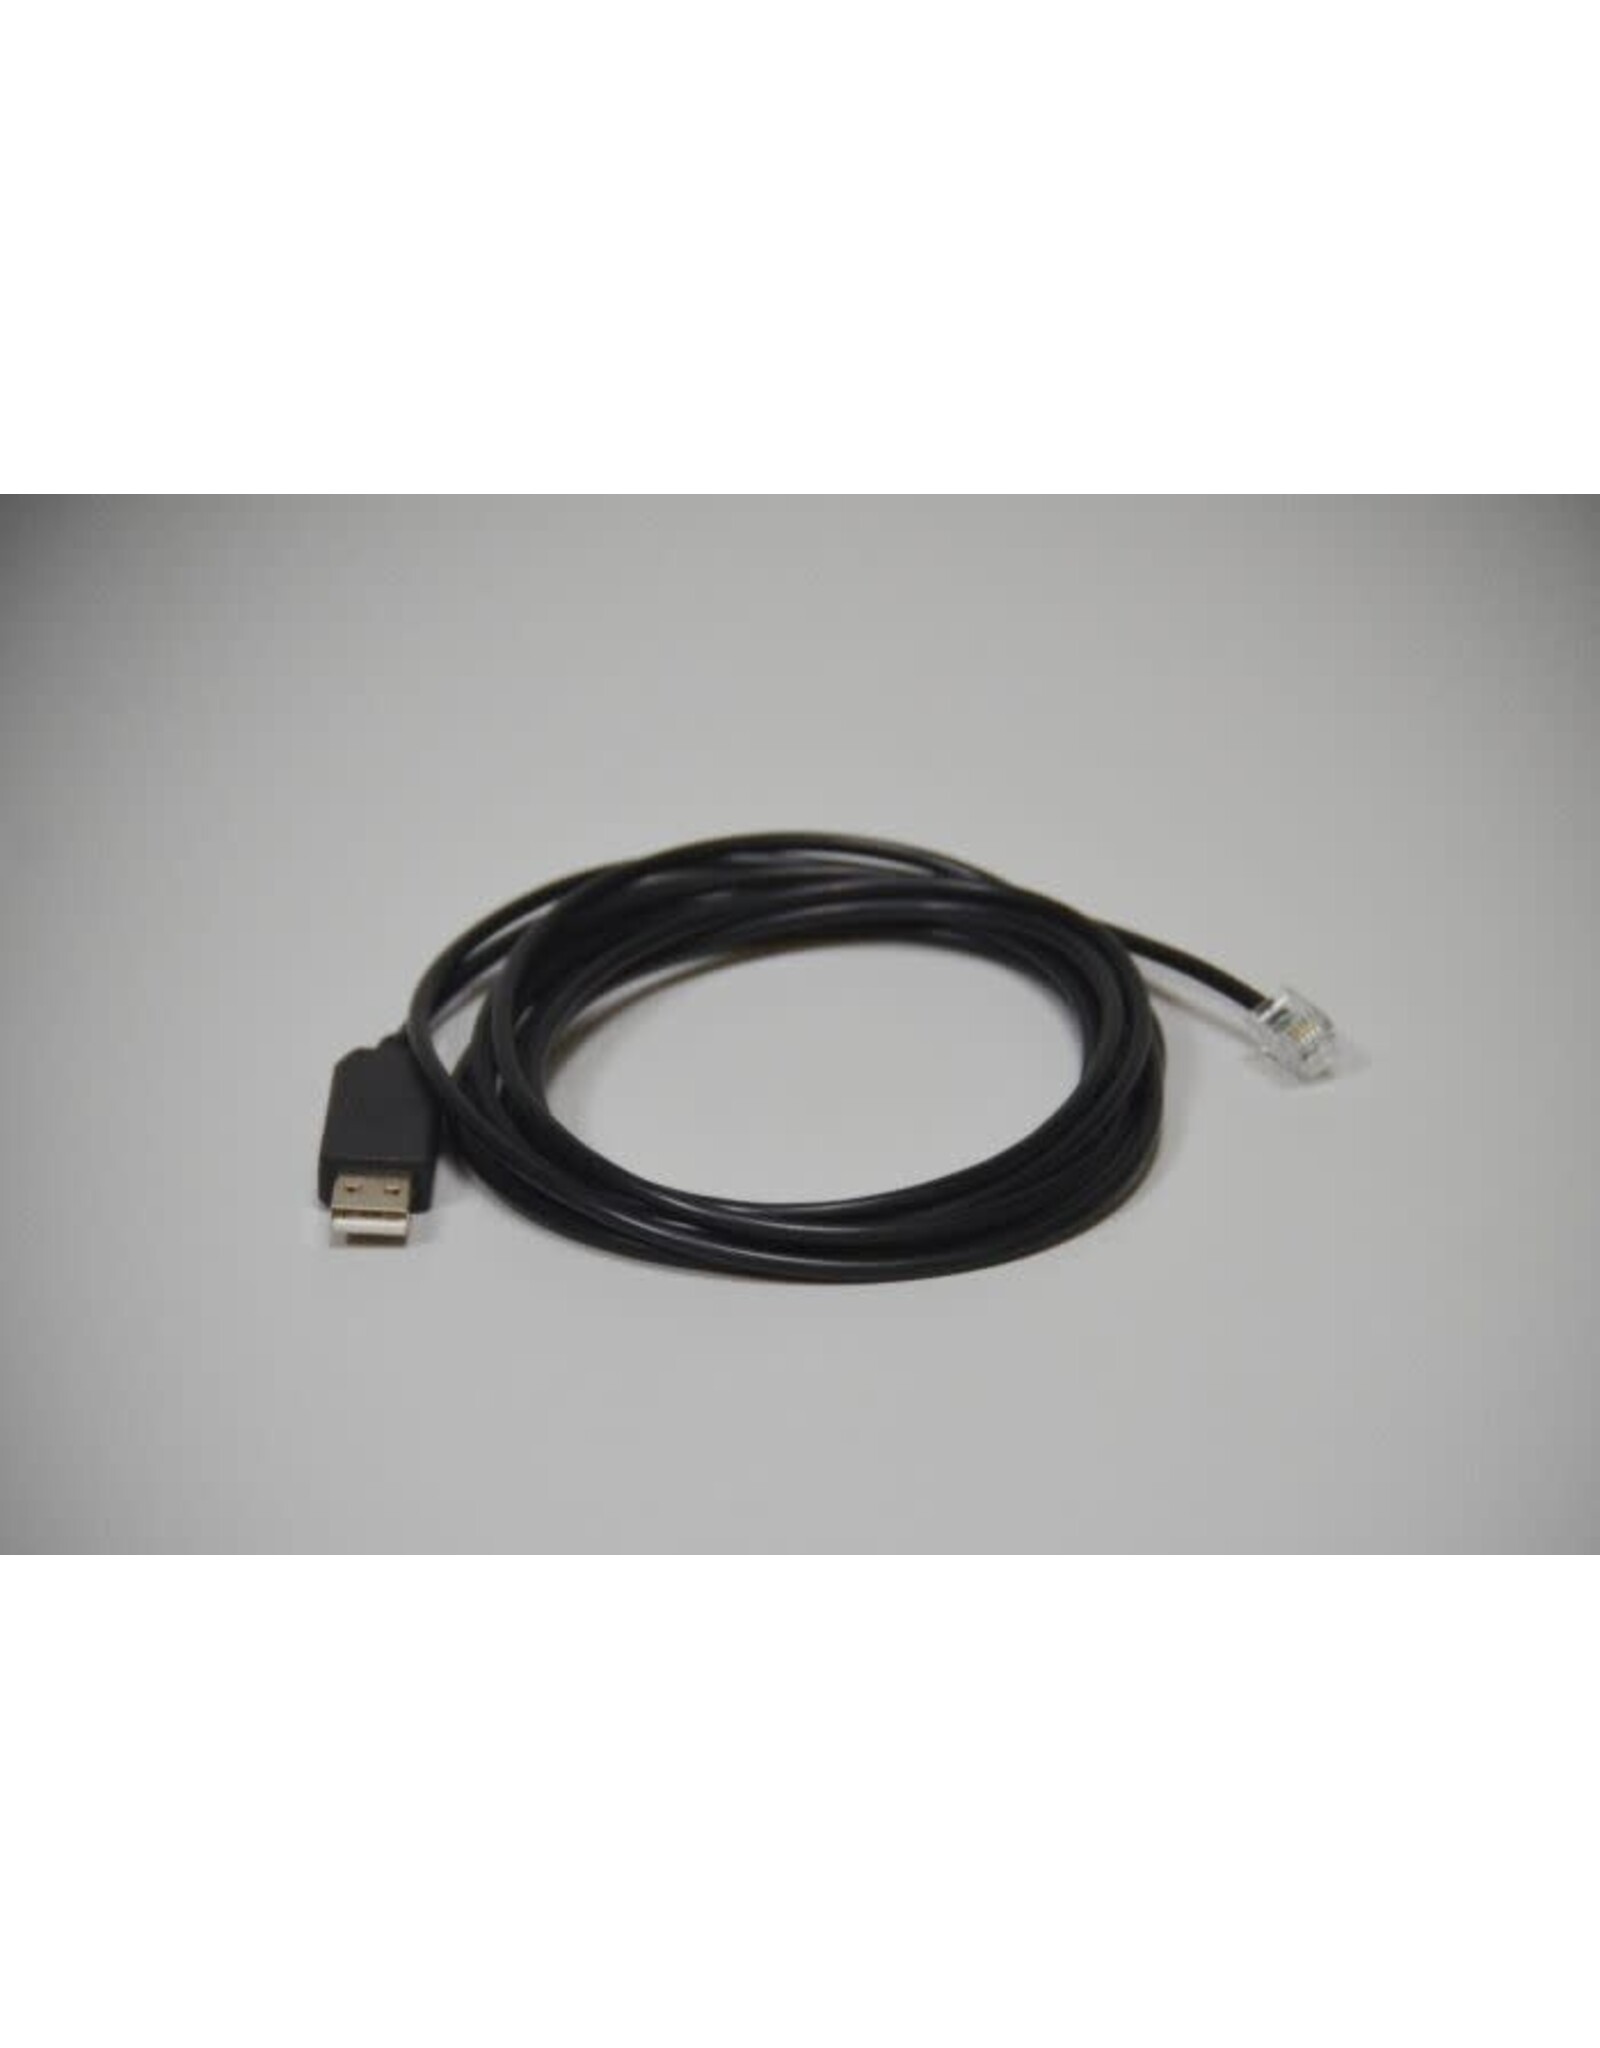 Blichmann Communication Cable for Tower of Power Blichmann